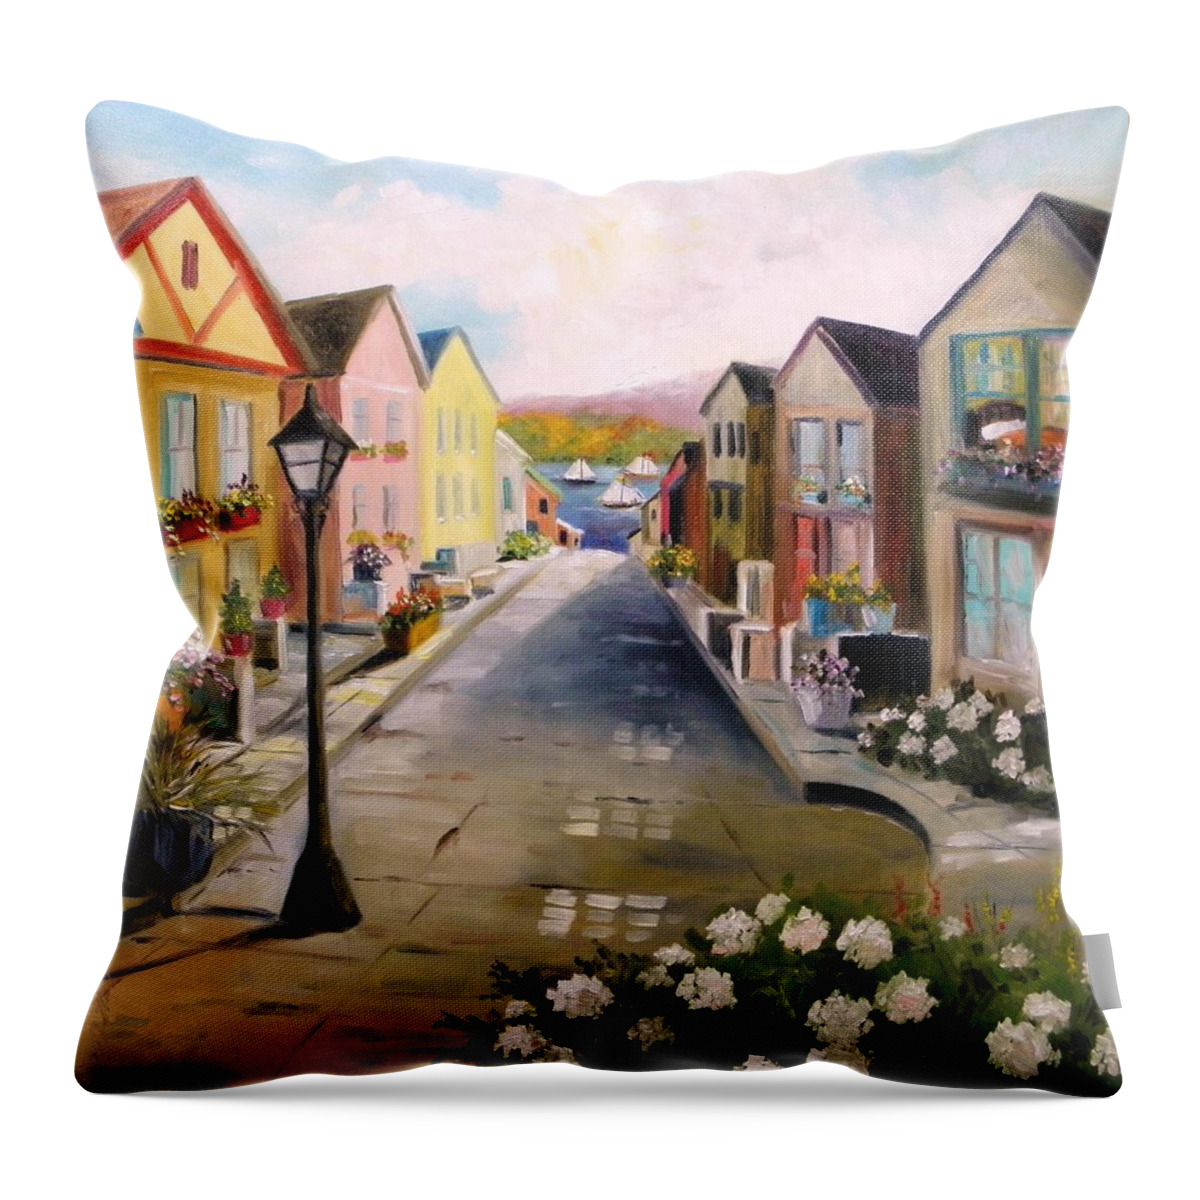 Village Throw Pillow featuring the painting Village Street by John Williams